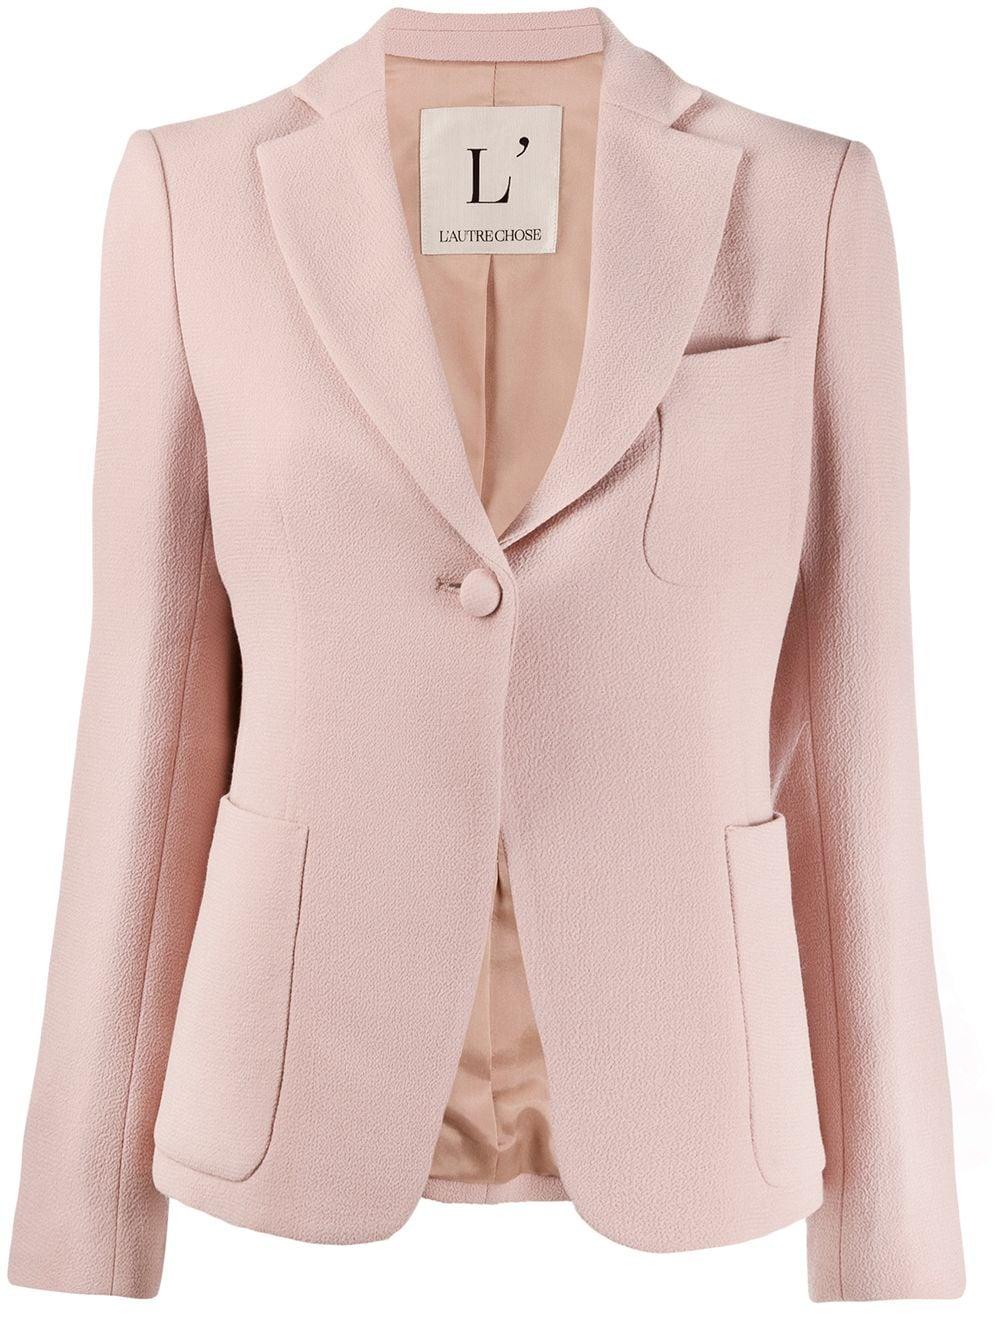 L'Autre Chose Wool Fitted Blazer in Pink - Lyst